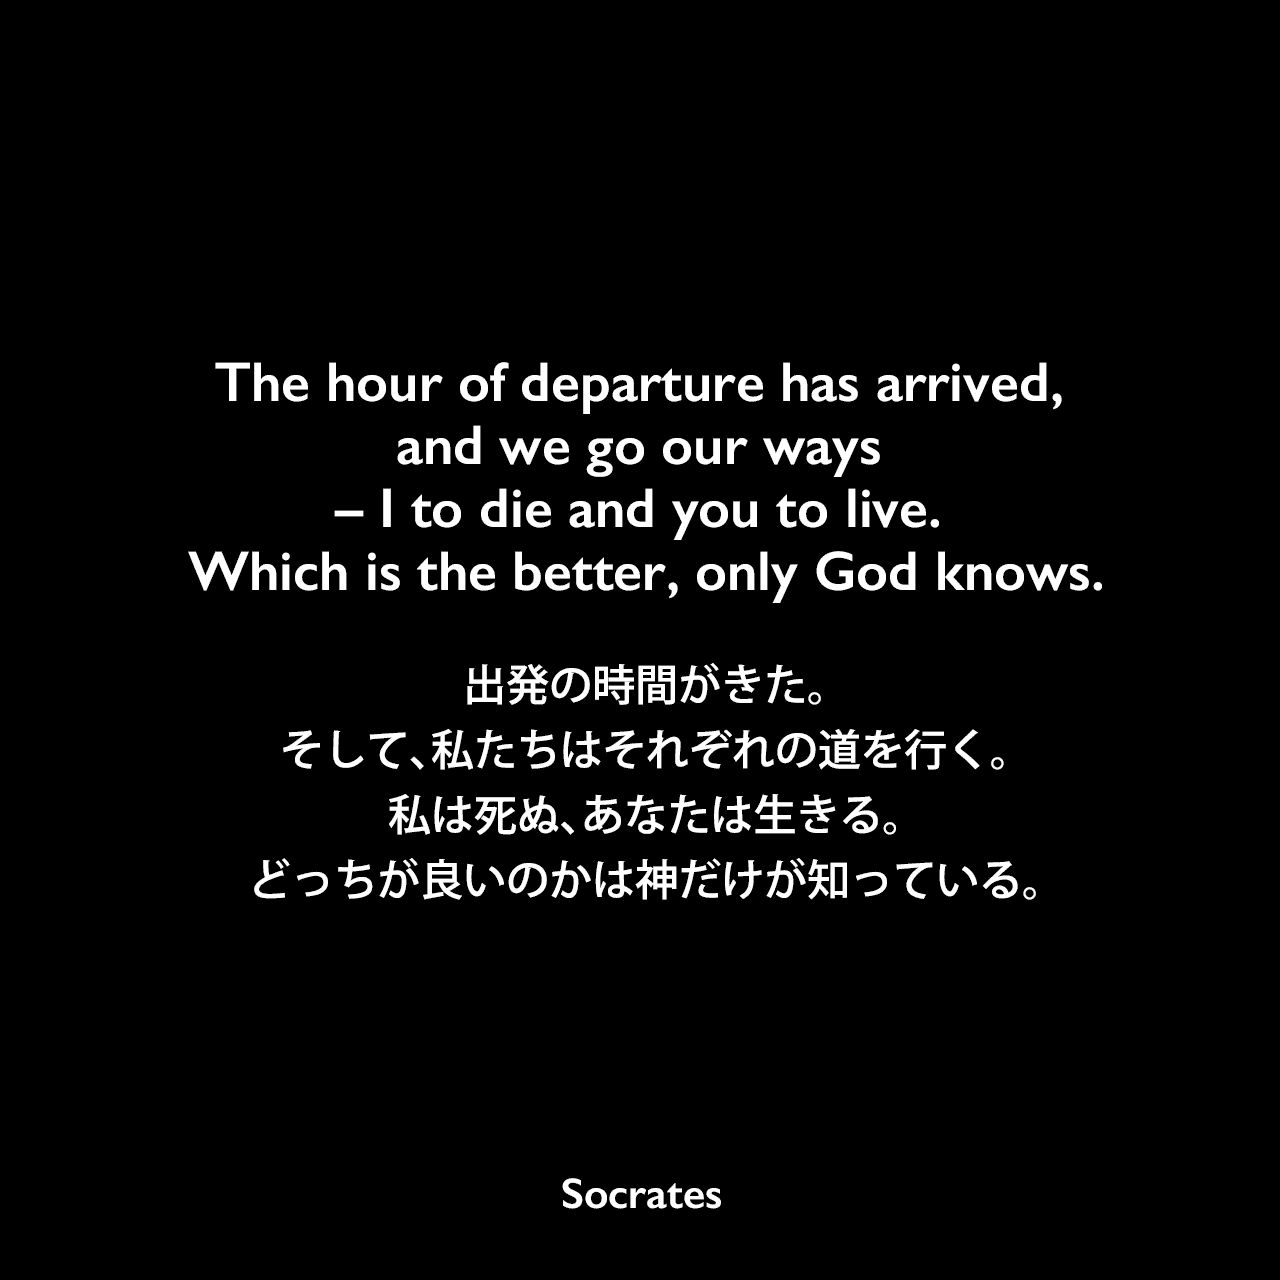 The hour of departure has arrived, and we go our ways – I to die and you to live. Which is the better, only God knows.出発の時間がきた。そして、私たちはそれぞれの道を行く。私は死ぬ、あなたは生きる。どっちが良いのかは神だけが知っている。- プラトンの本「ソクラテスの弁明」よりSocrates